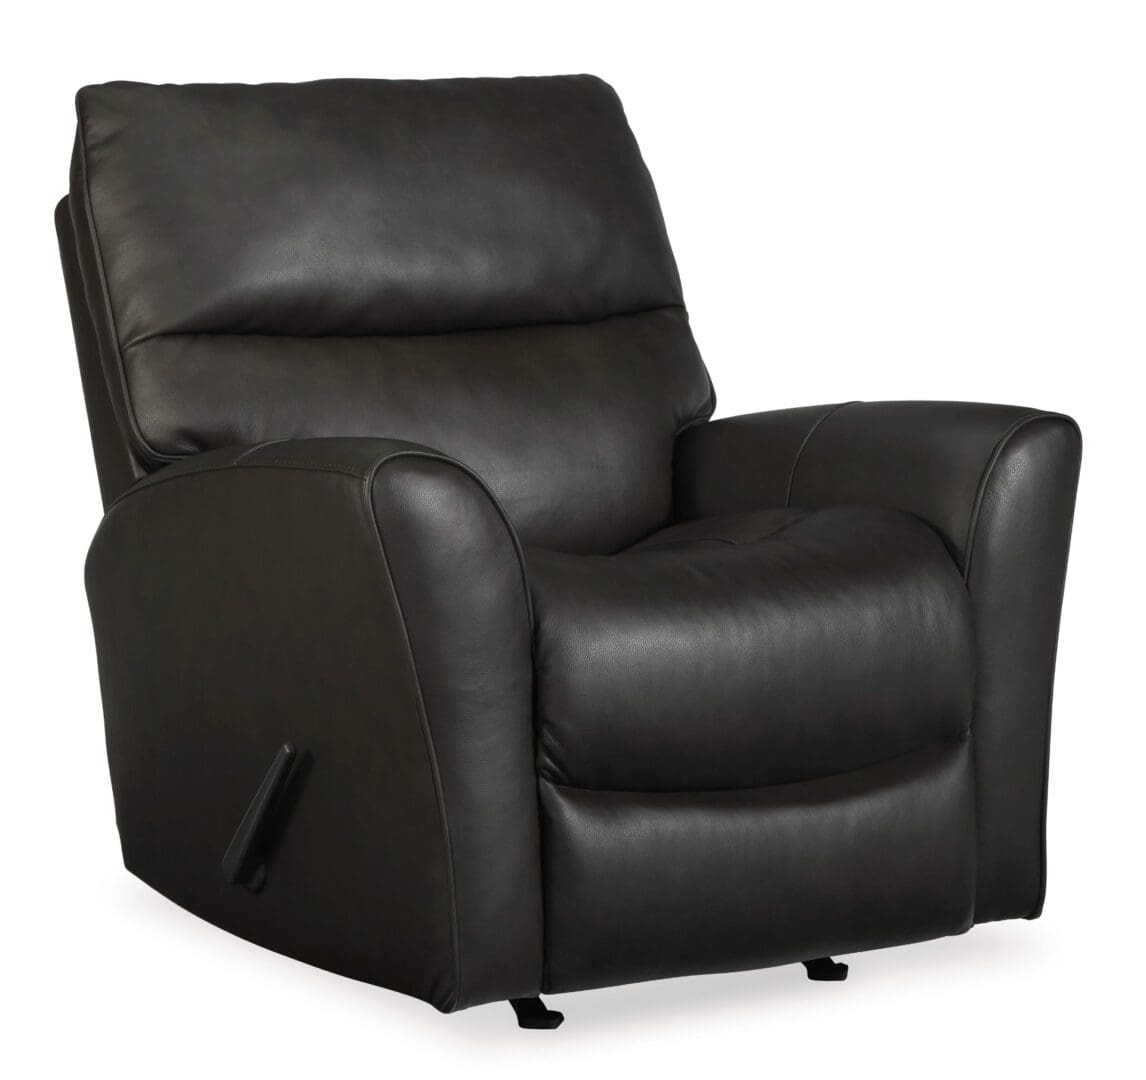 A black leather recliner chair with arms and back.